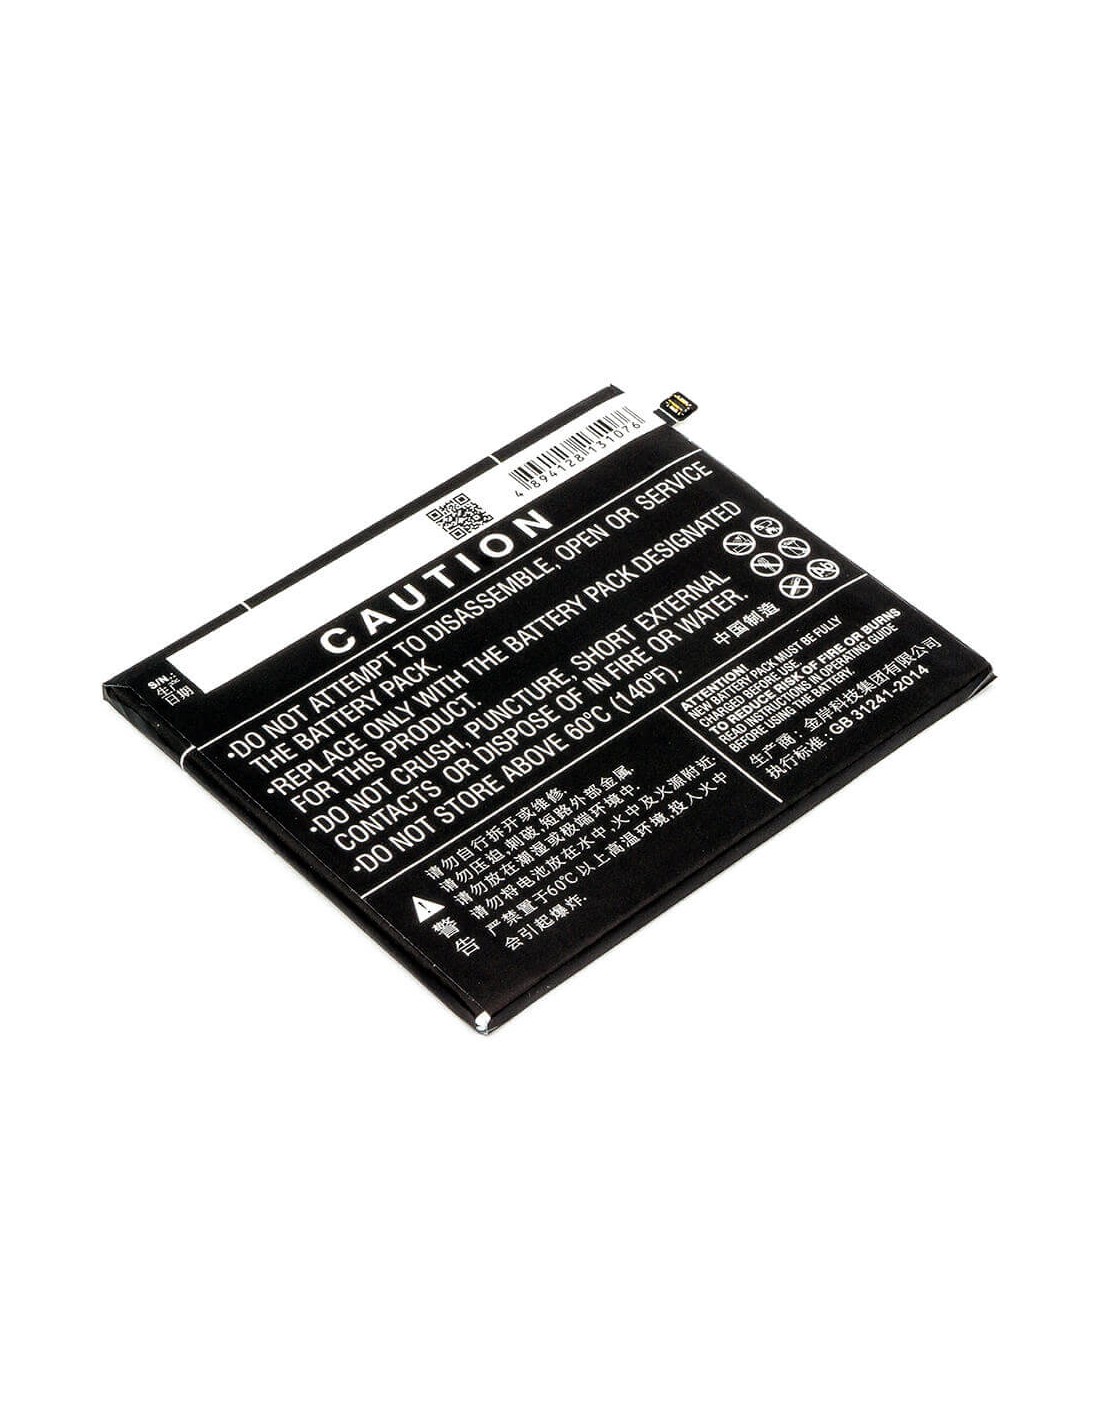 Battery for Gionee, Elife S10, Elife S10 Dual Sim, Elife S10 Dual Sim Td 3.85V, 3450mAh - 13.28Wh